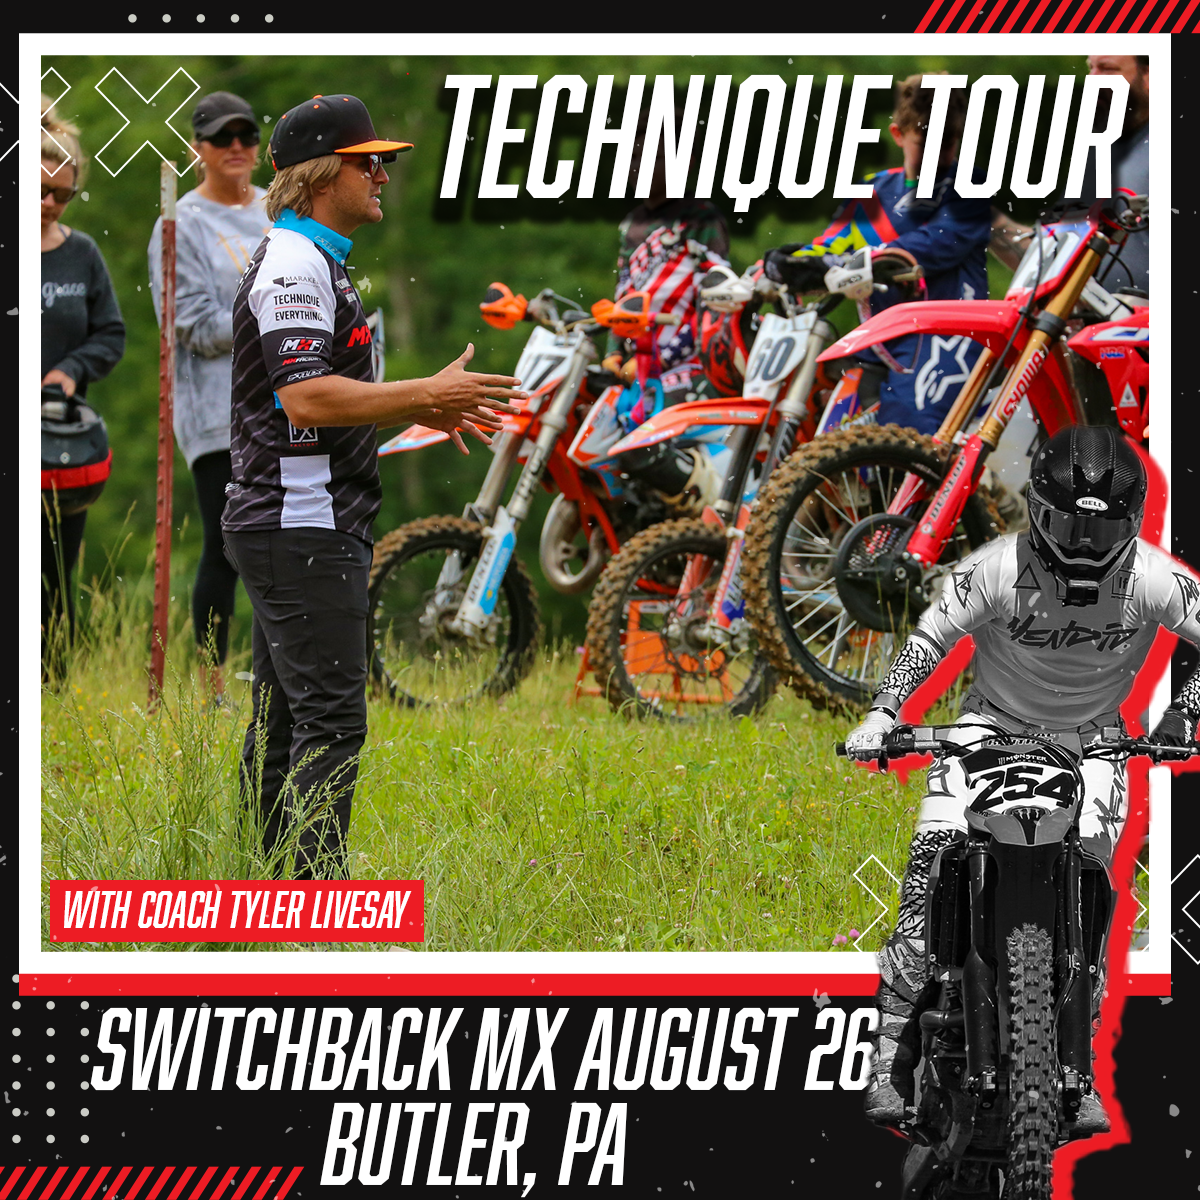 Switchback MX | Butler, PA | August 26th